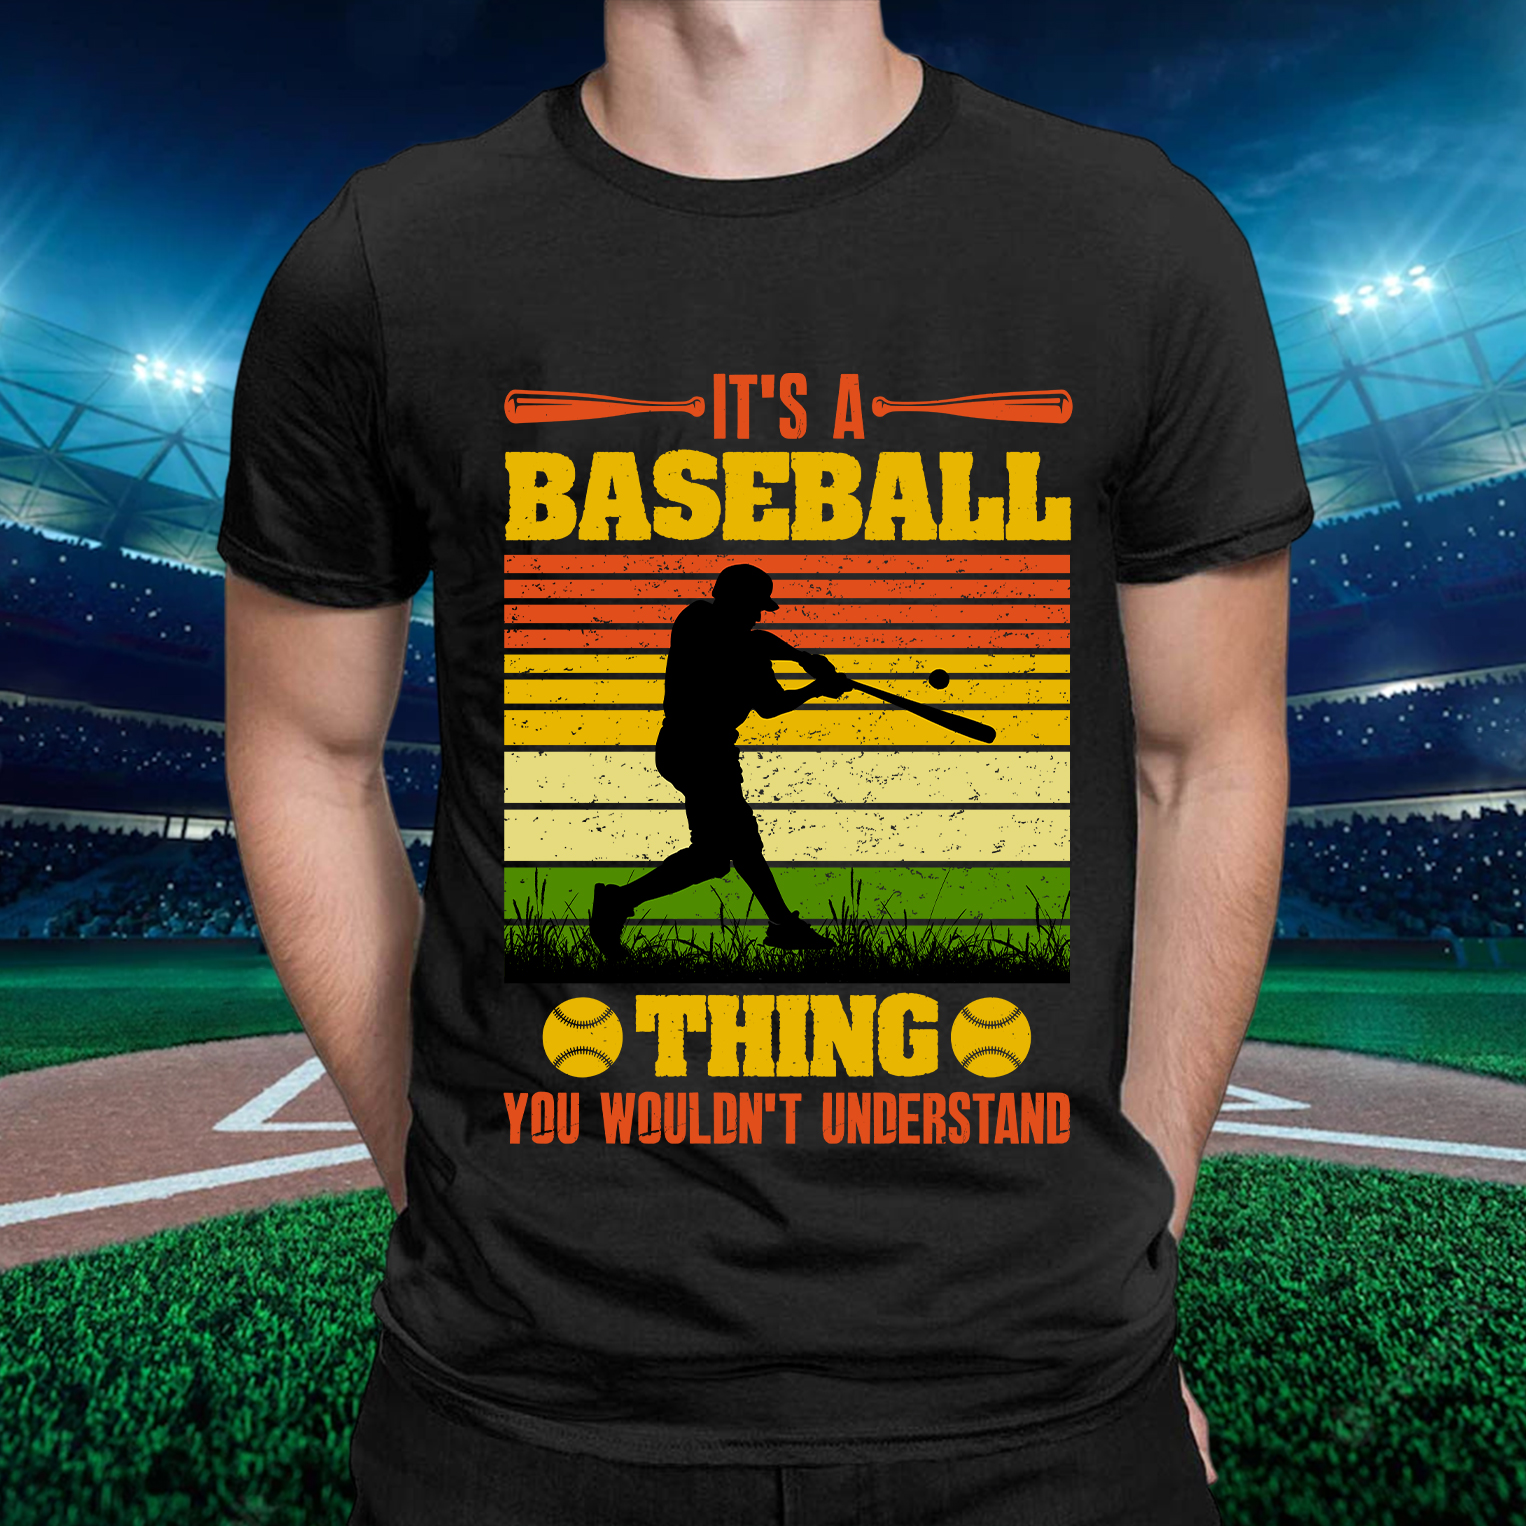 It's A Baseball Thing You Wouldn't Understand Round Neck T-Shirt -BSTC1314-Guru-buzz